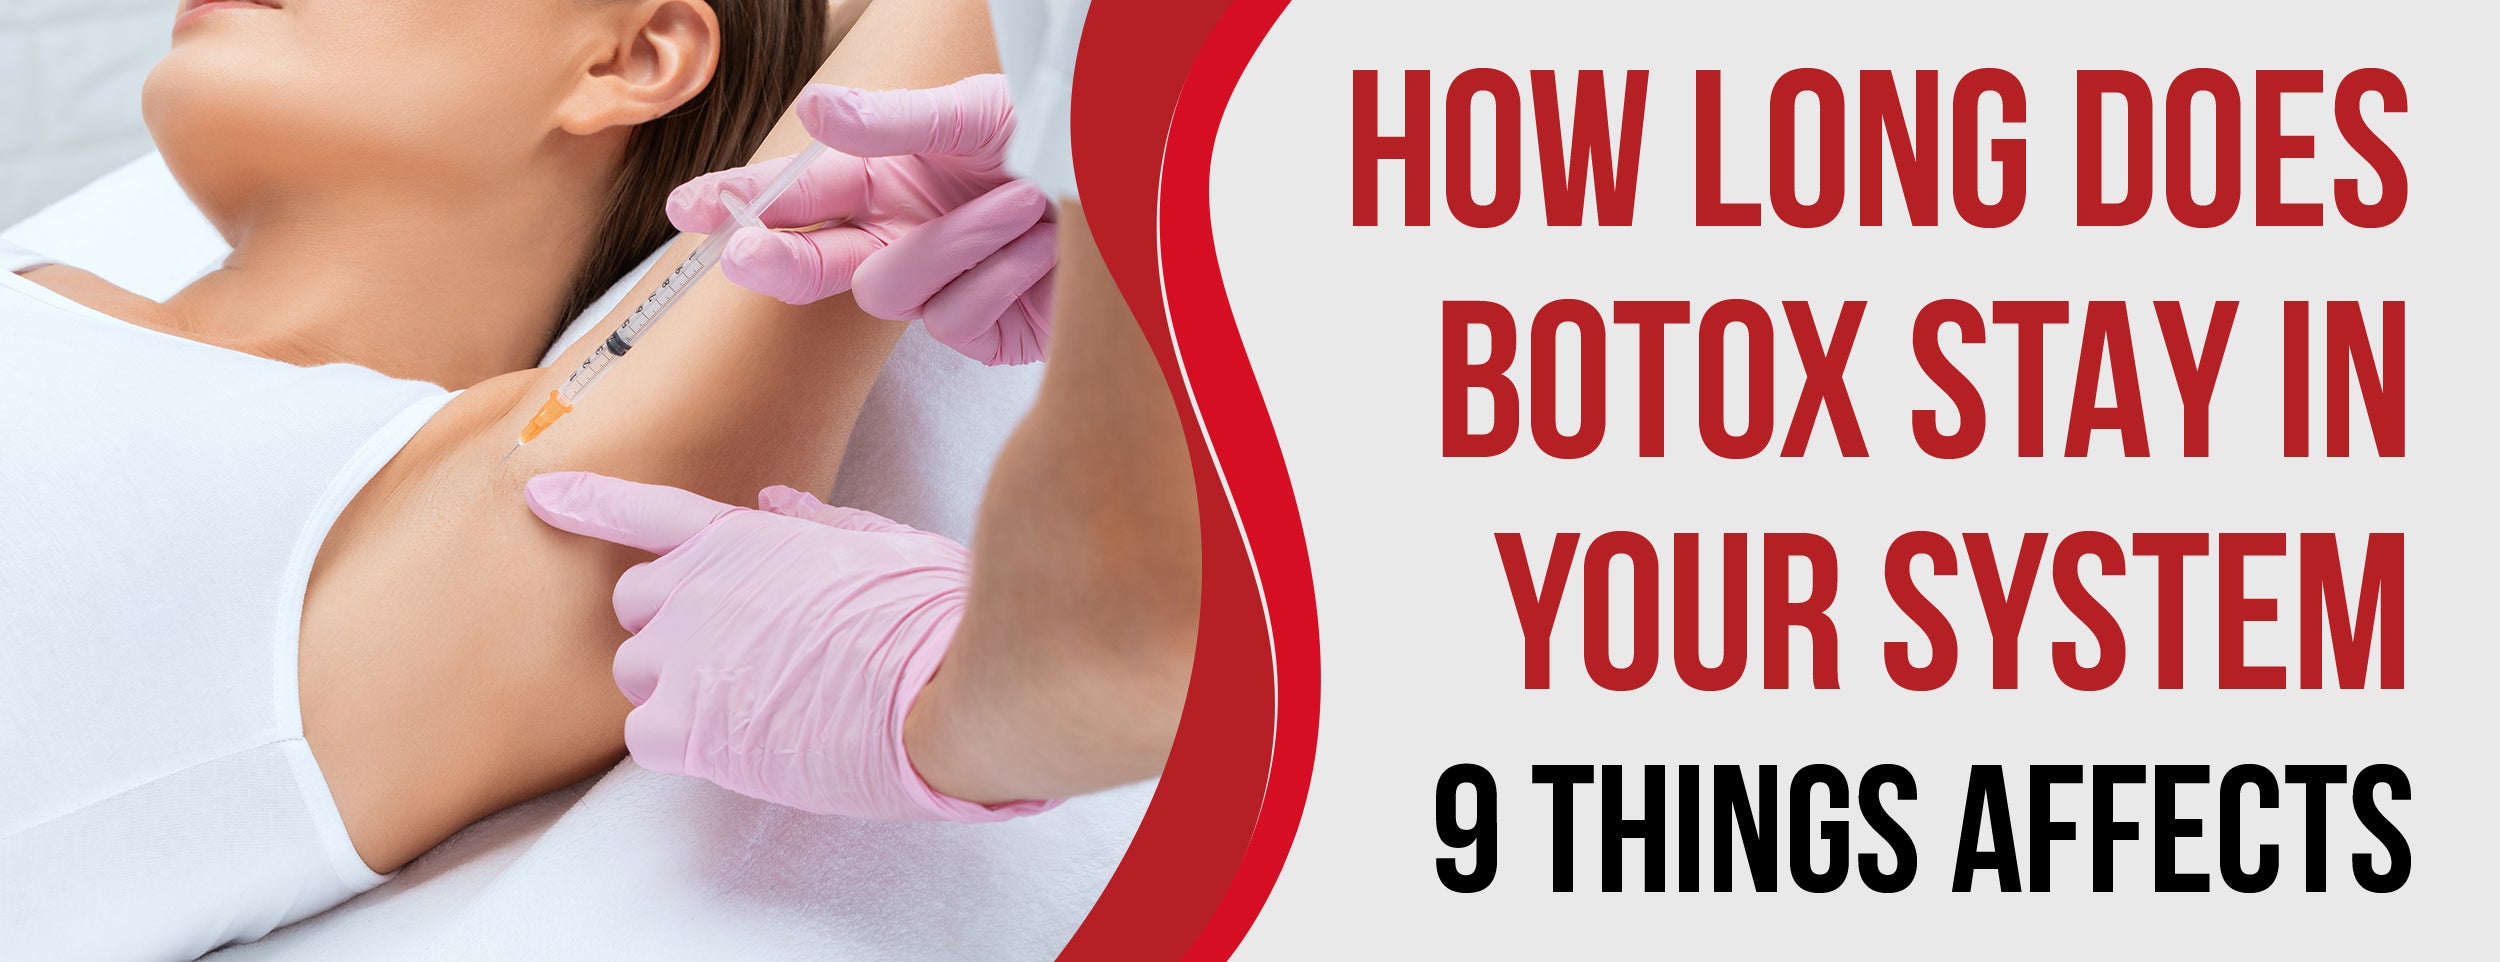 Factors That Affect How Long Botox Stays In Your System